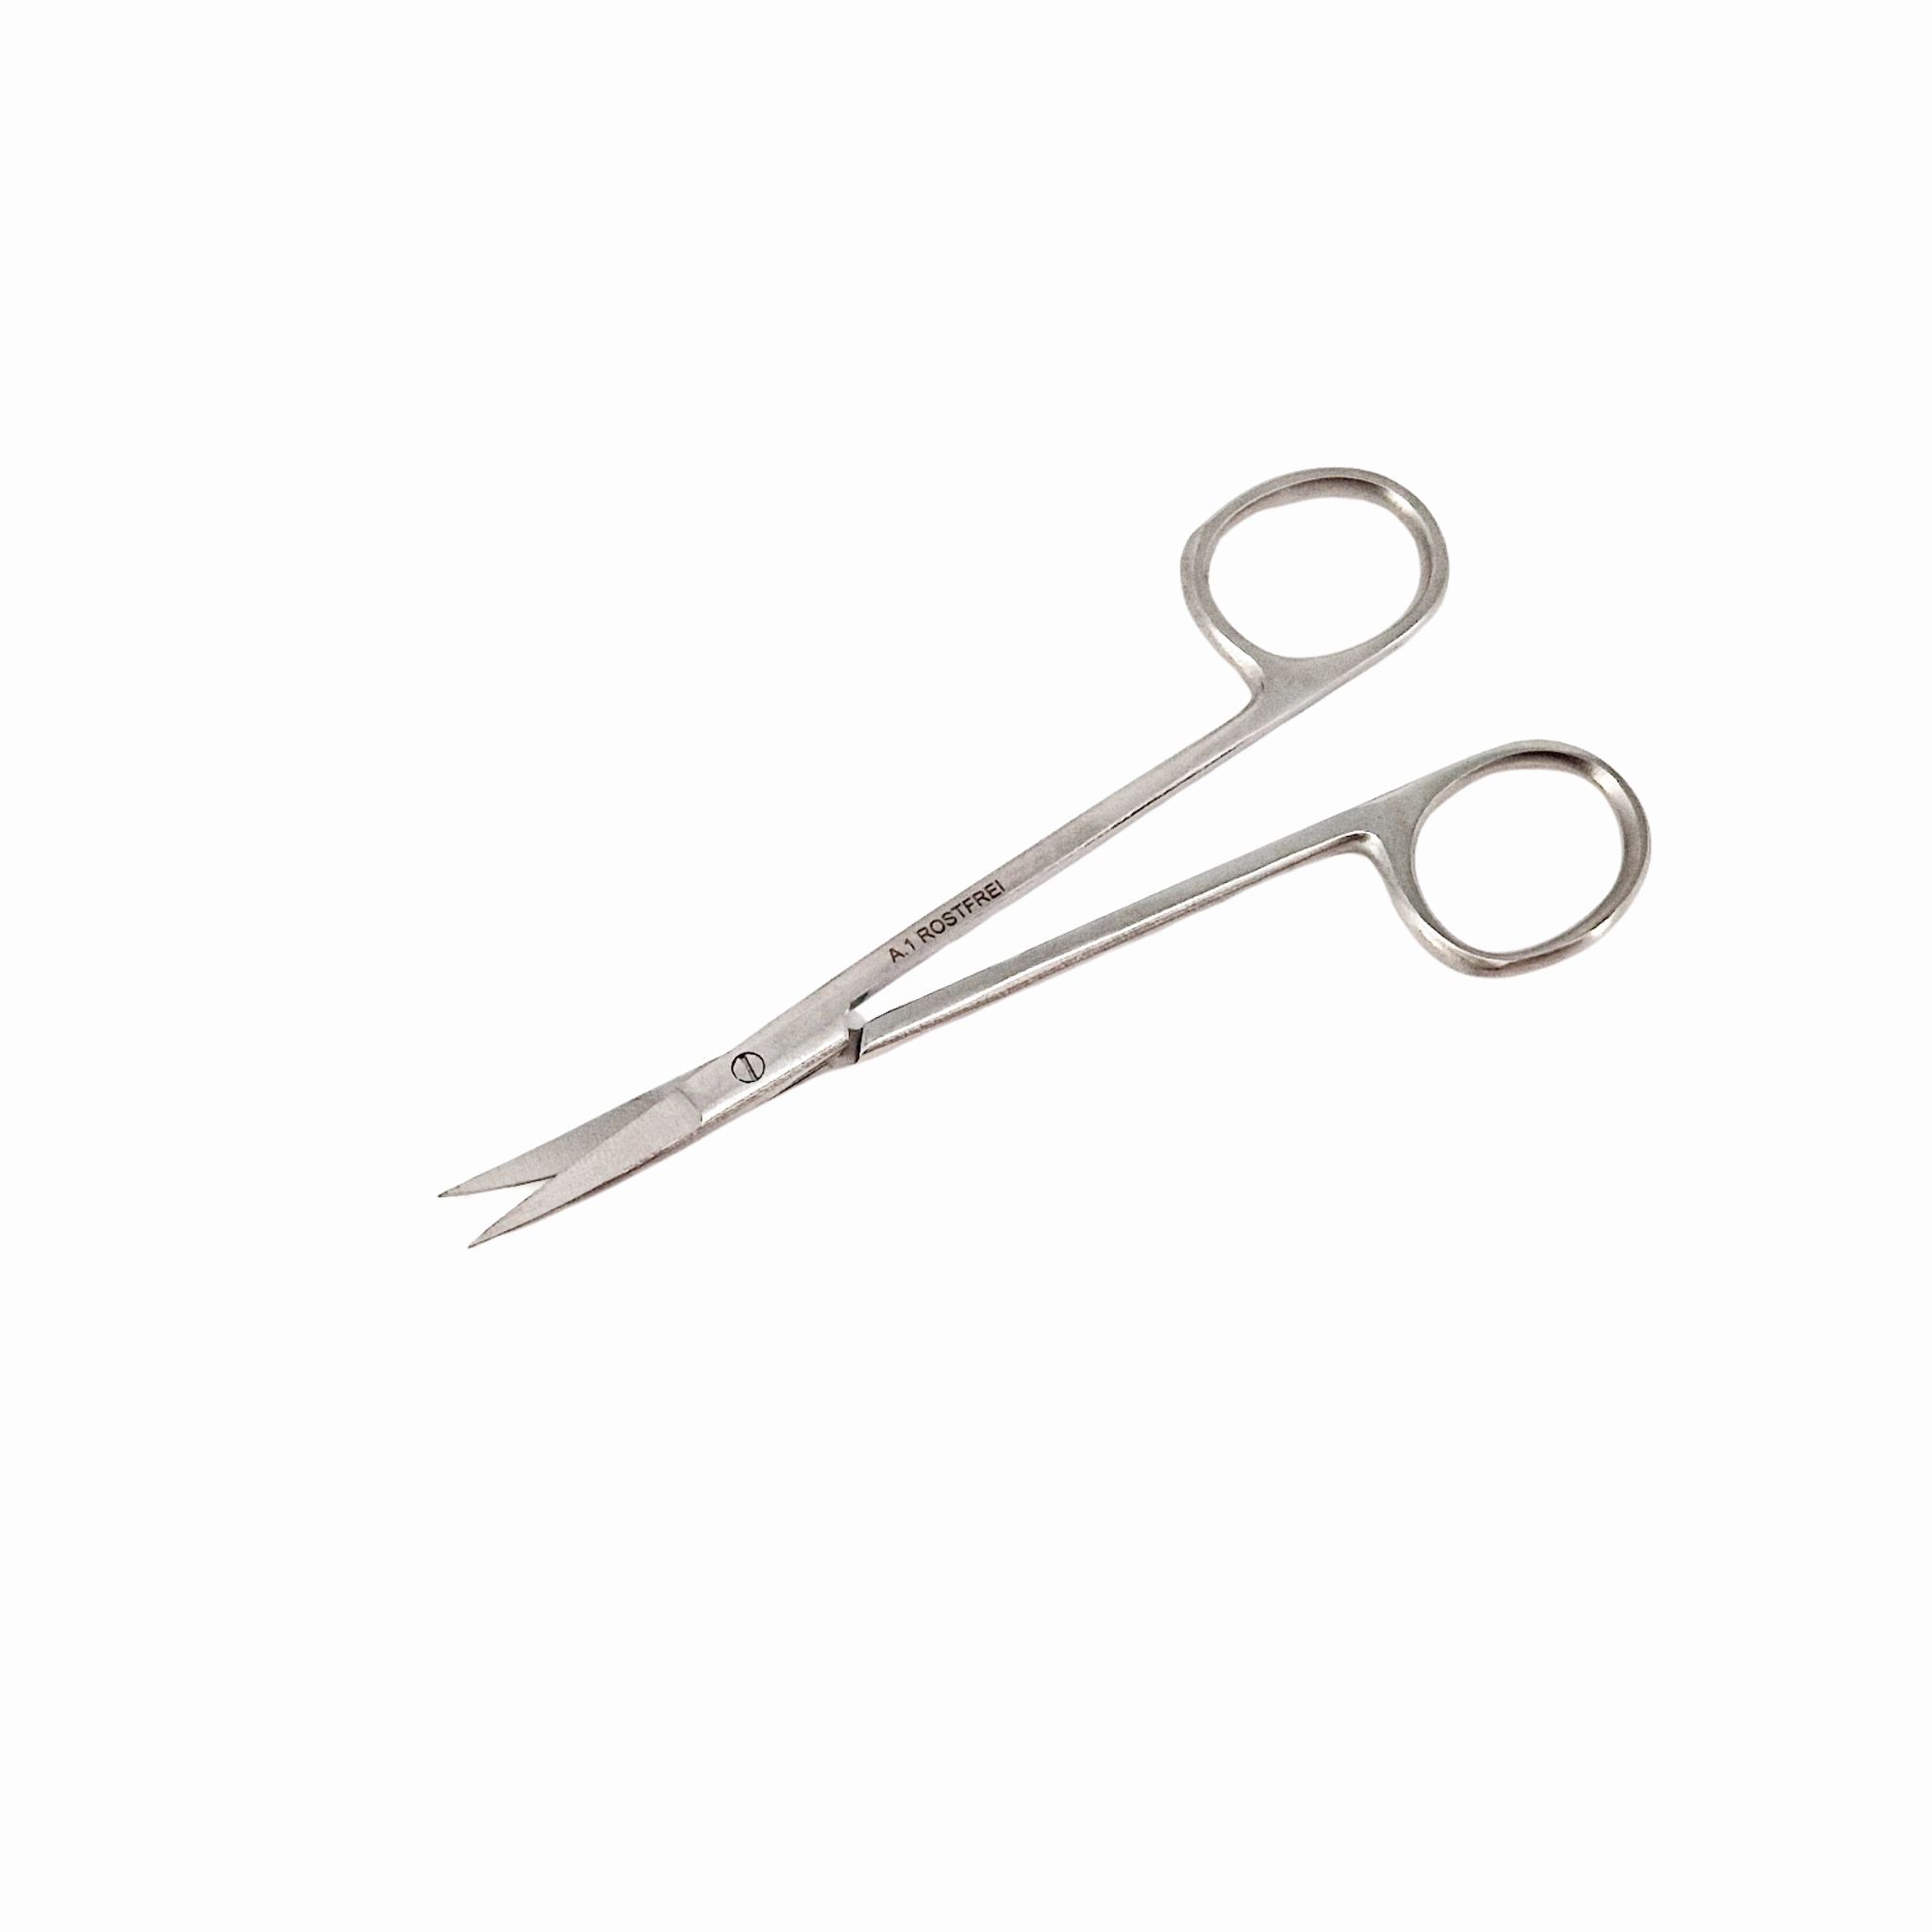 Lavabis skin and thread scissors curved stainless steel